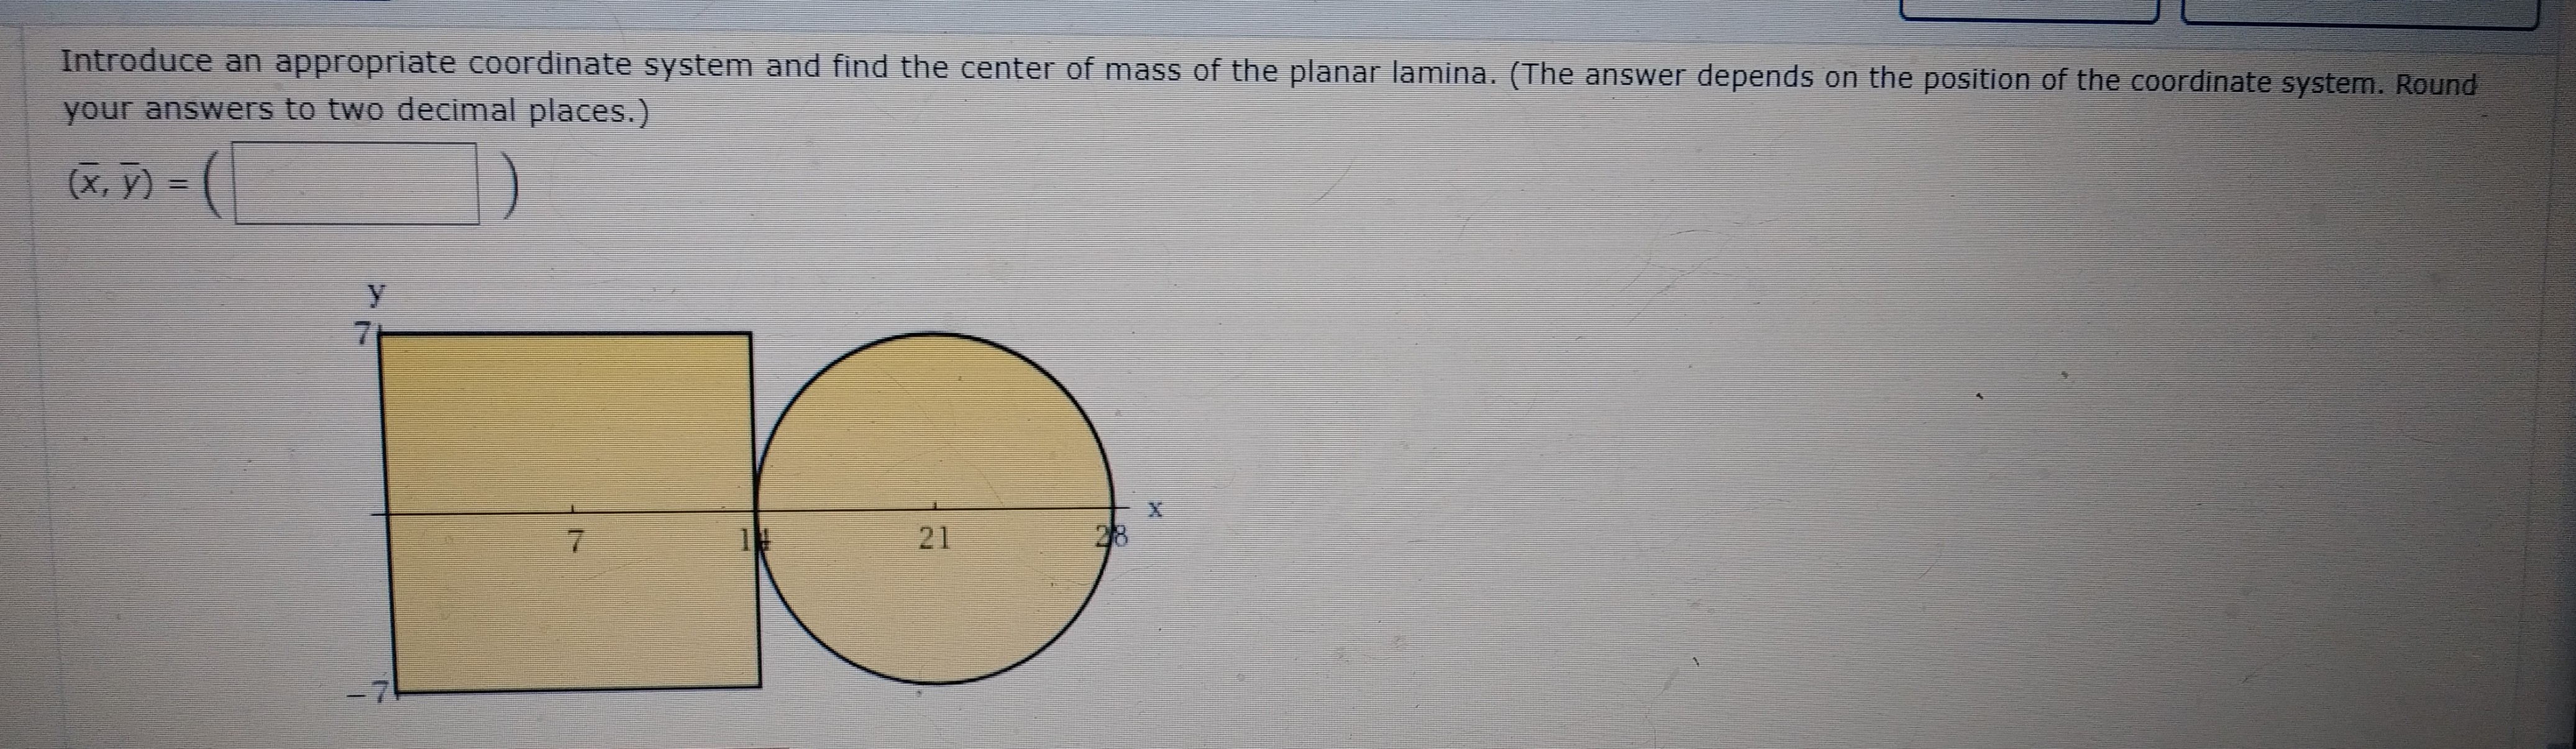 Introduce an appropriate coordinate system and find the center of mass of the planar lamina. (The answer depends on the position of the coordinate system. Round
your answers to two decimal places.)
(x. ÿ) - (
21
